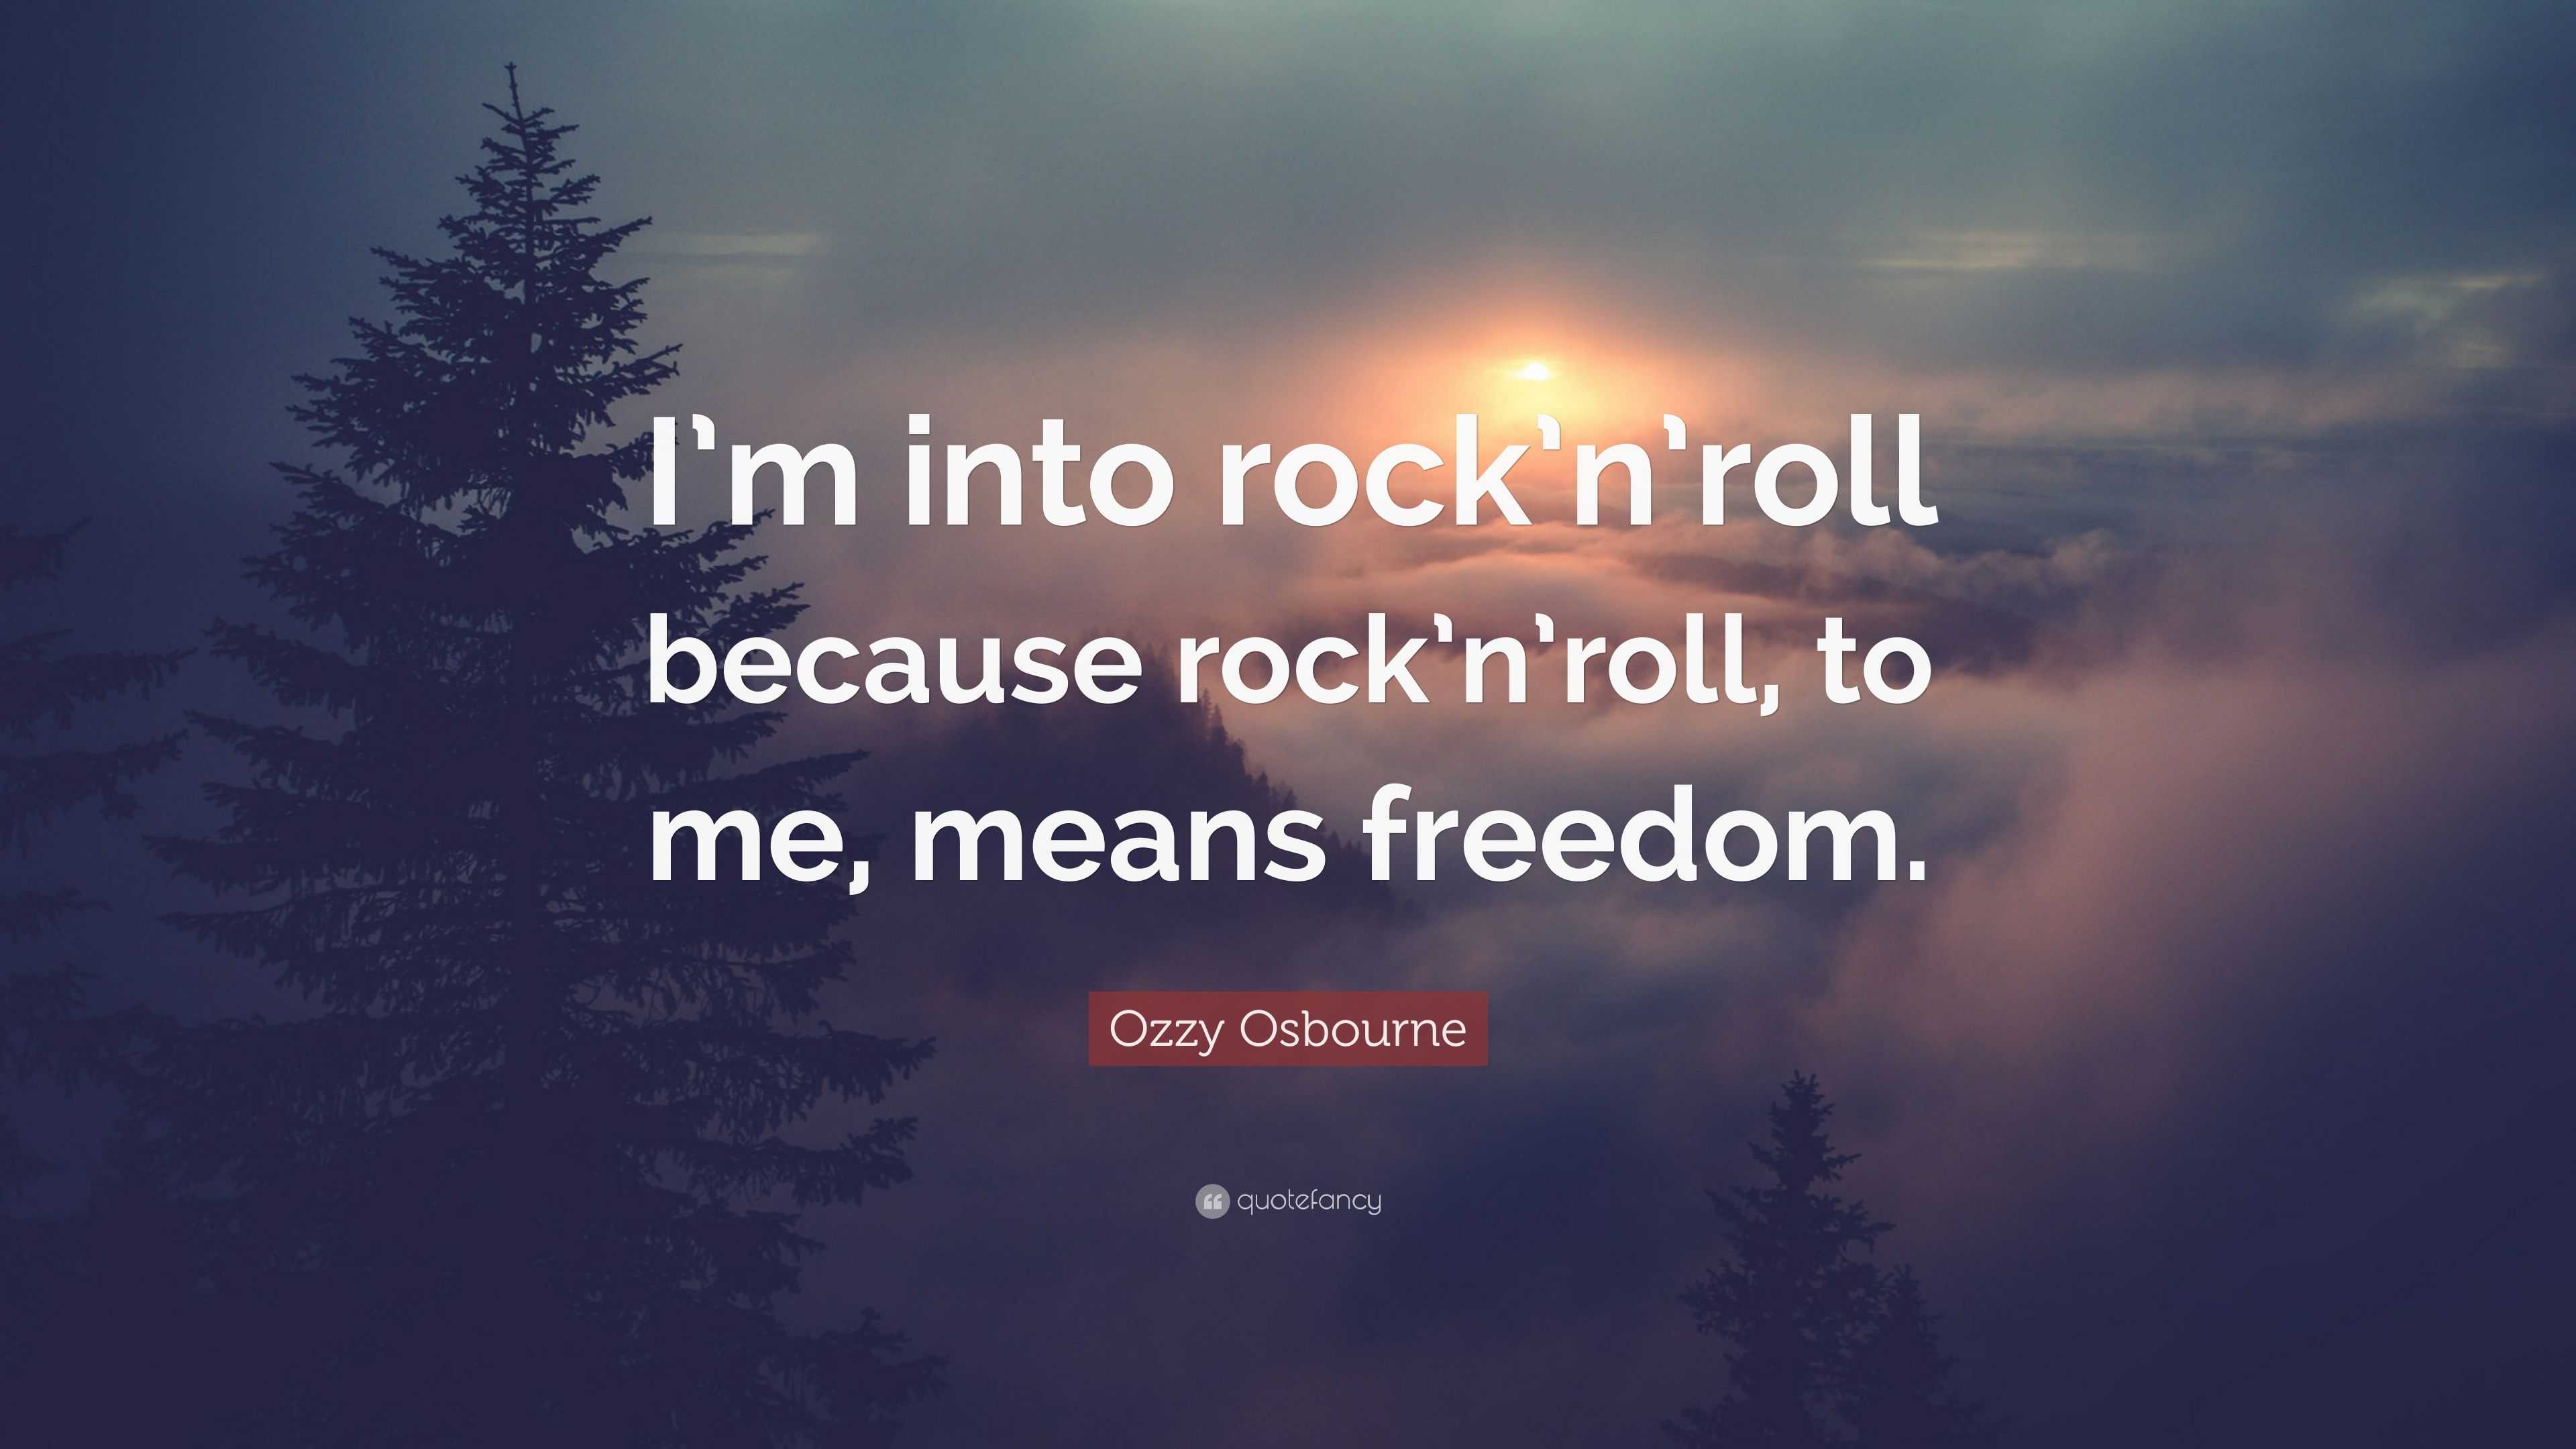 Ozzy Osbourne Quote: “I'm into rock'n'roll because rock'n'roll, to